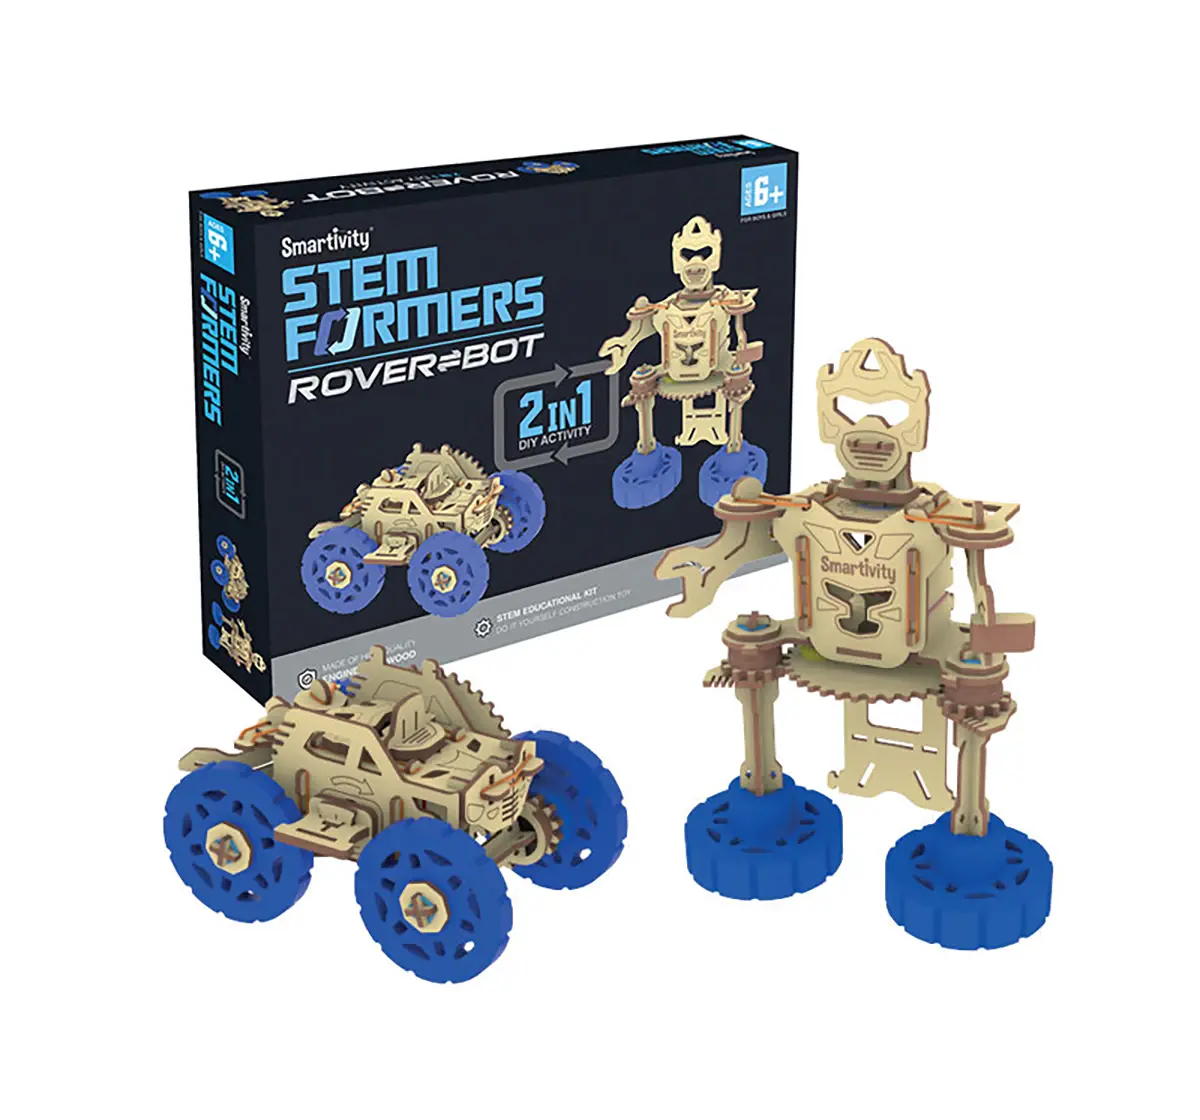 Smartivity Formers rover bot STEM for Kids age 6Y+ 